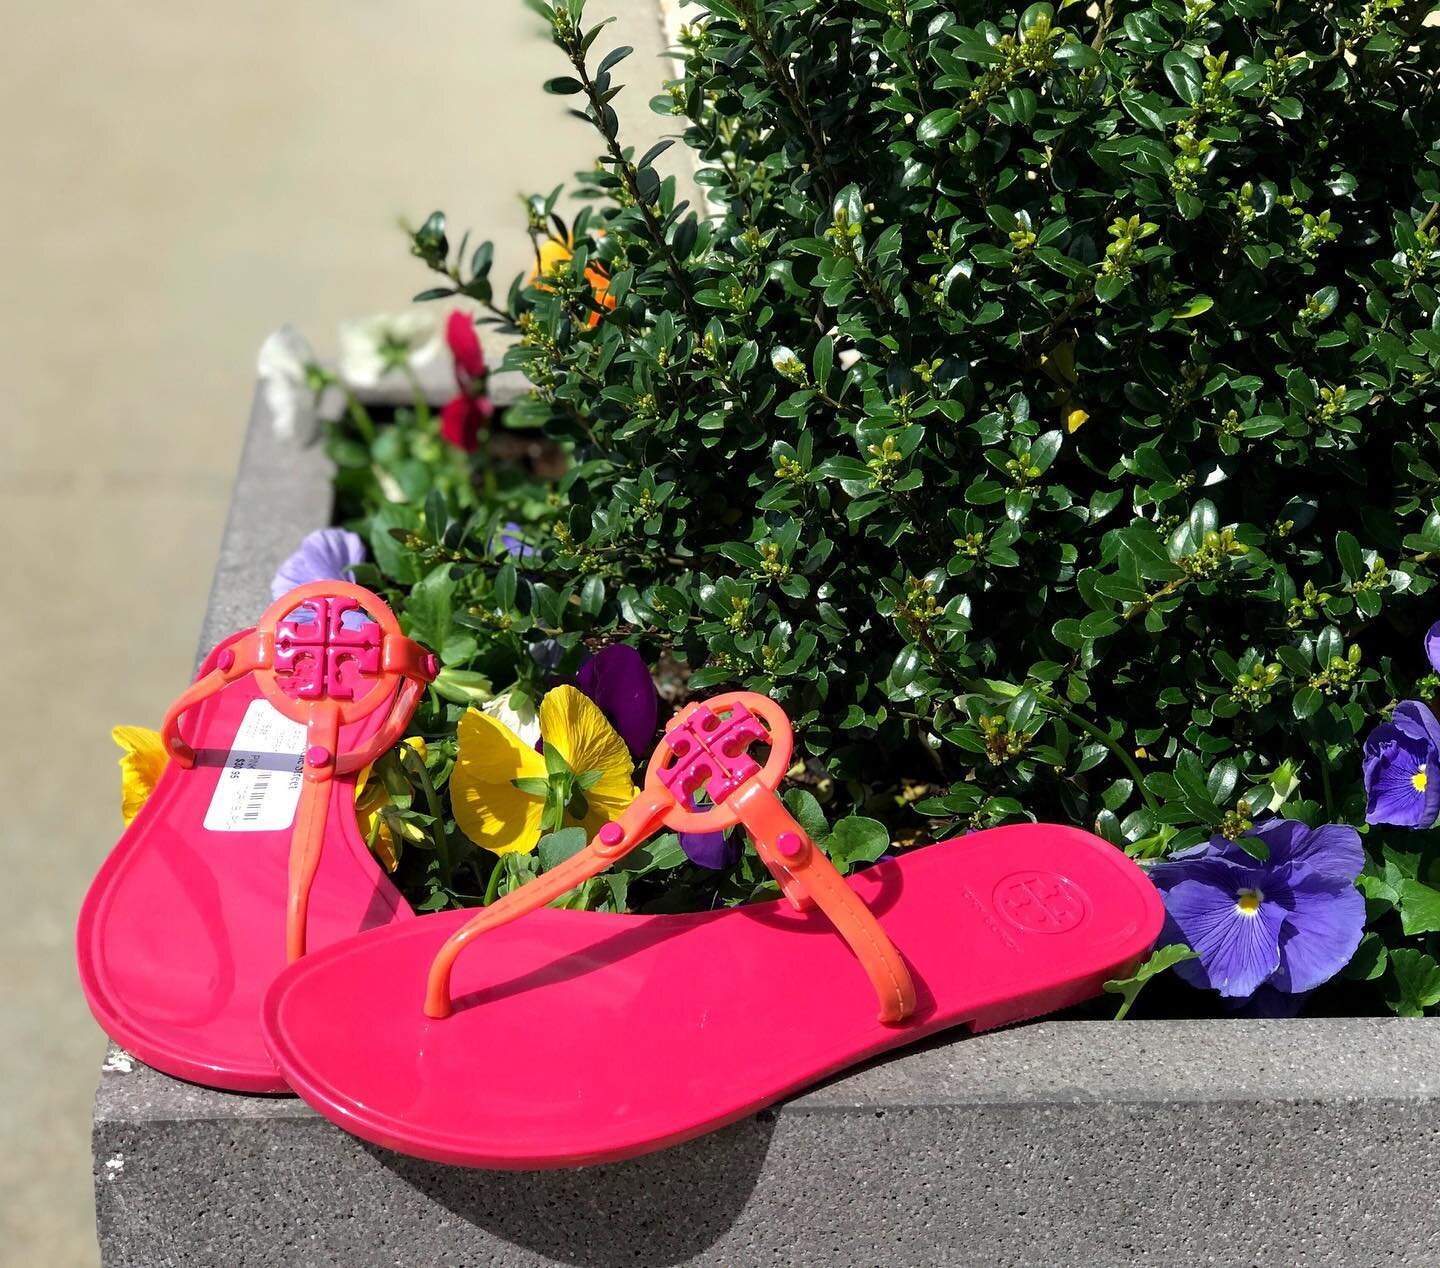 Brighten up your day with these Tory Burch sandals! 🌺Available at @greenestreesnyder for $30.96 size 7
⠀⠀⠀⠀⠀⠀⠀⠀⠀
For inquiries call or email us!
📞267-807-1295
📧snyder@greenestreet.com